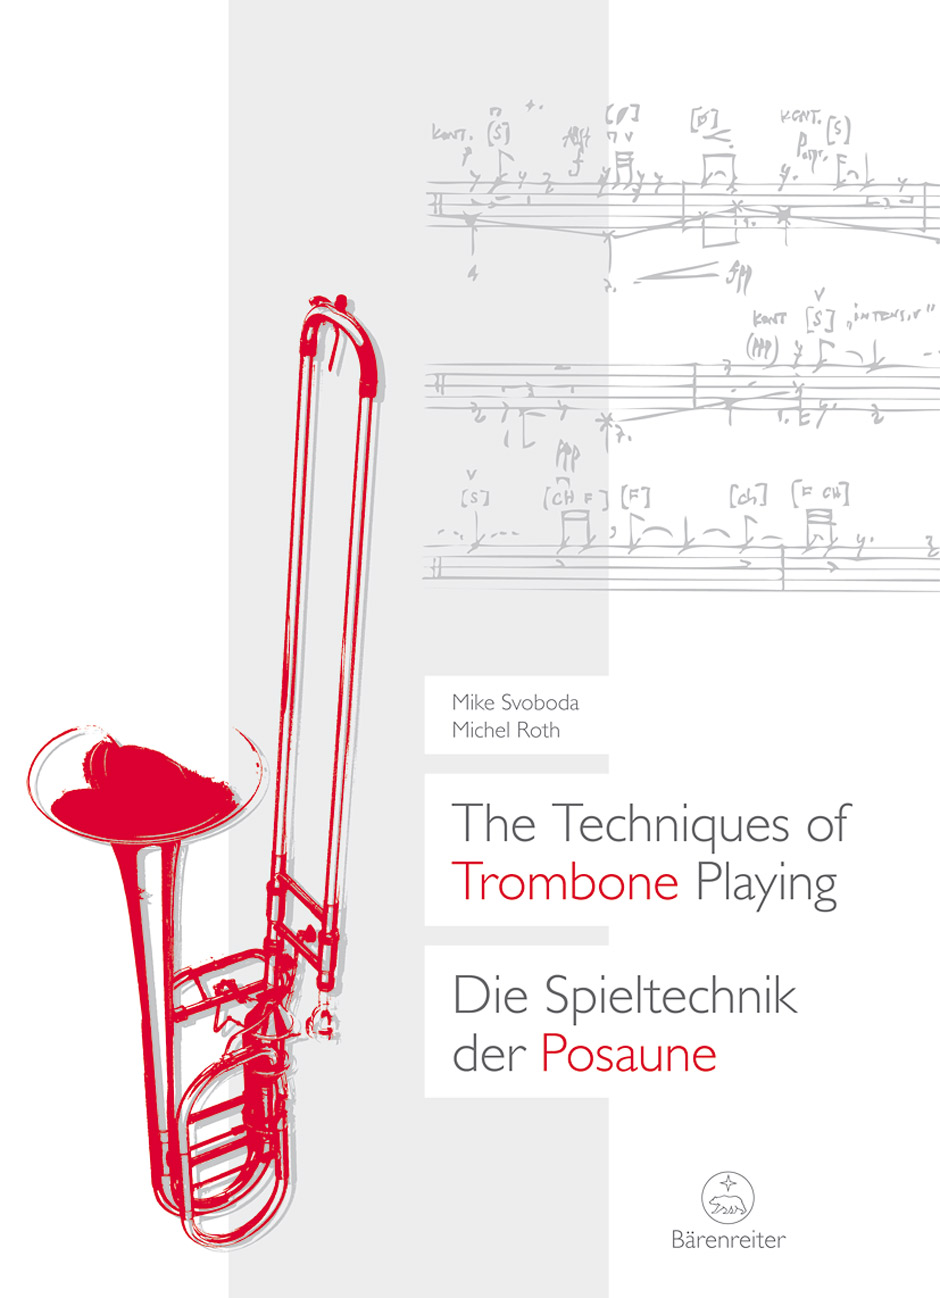 BARENREITER SVOBODA MIKE & ROTH MICHEL - THE TECHNIQUES OF TROMBONE PLAYING